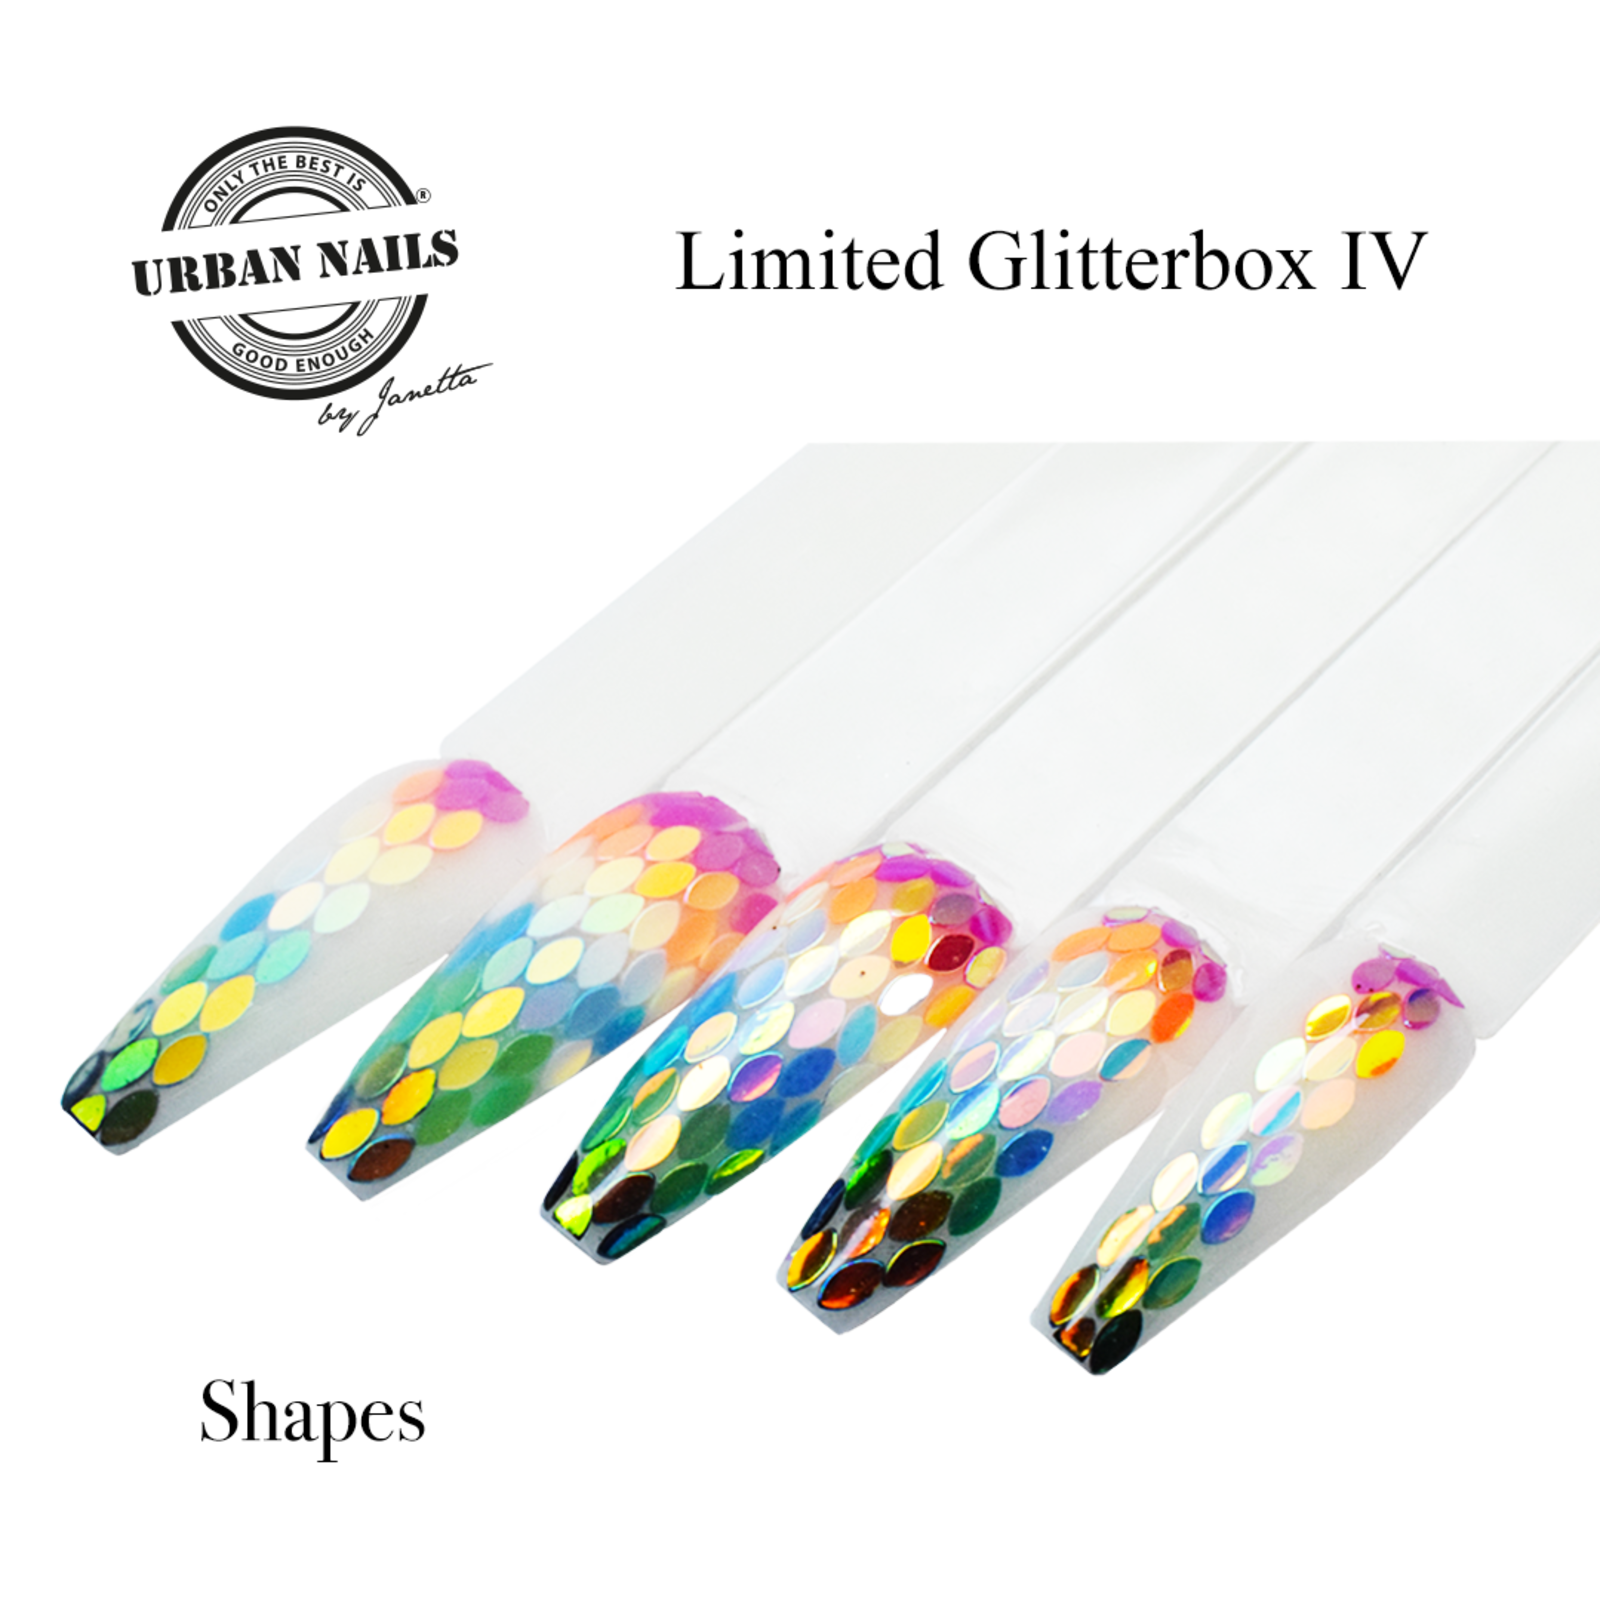 Limited Glitterbox lV Shapes